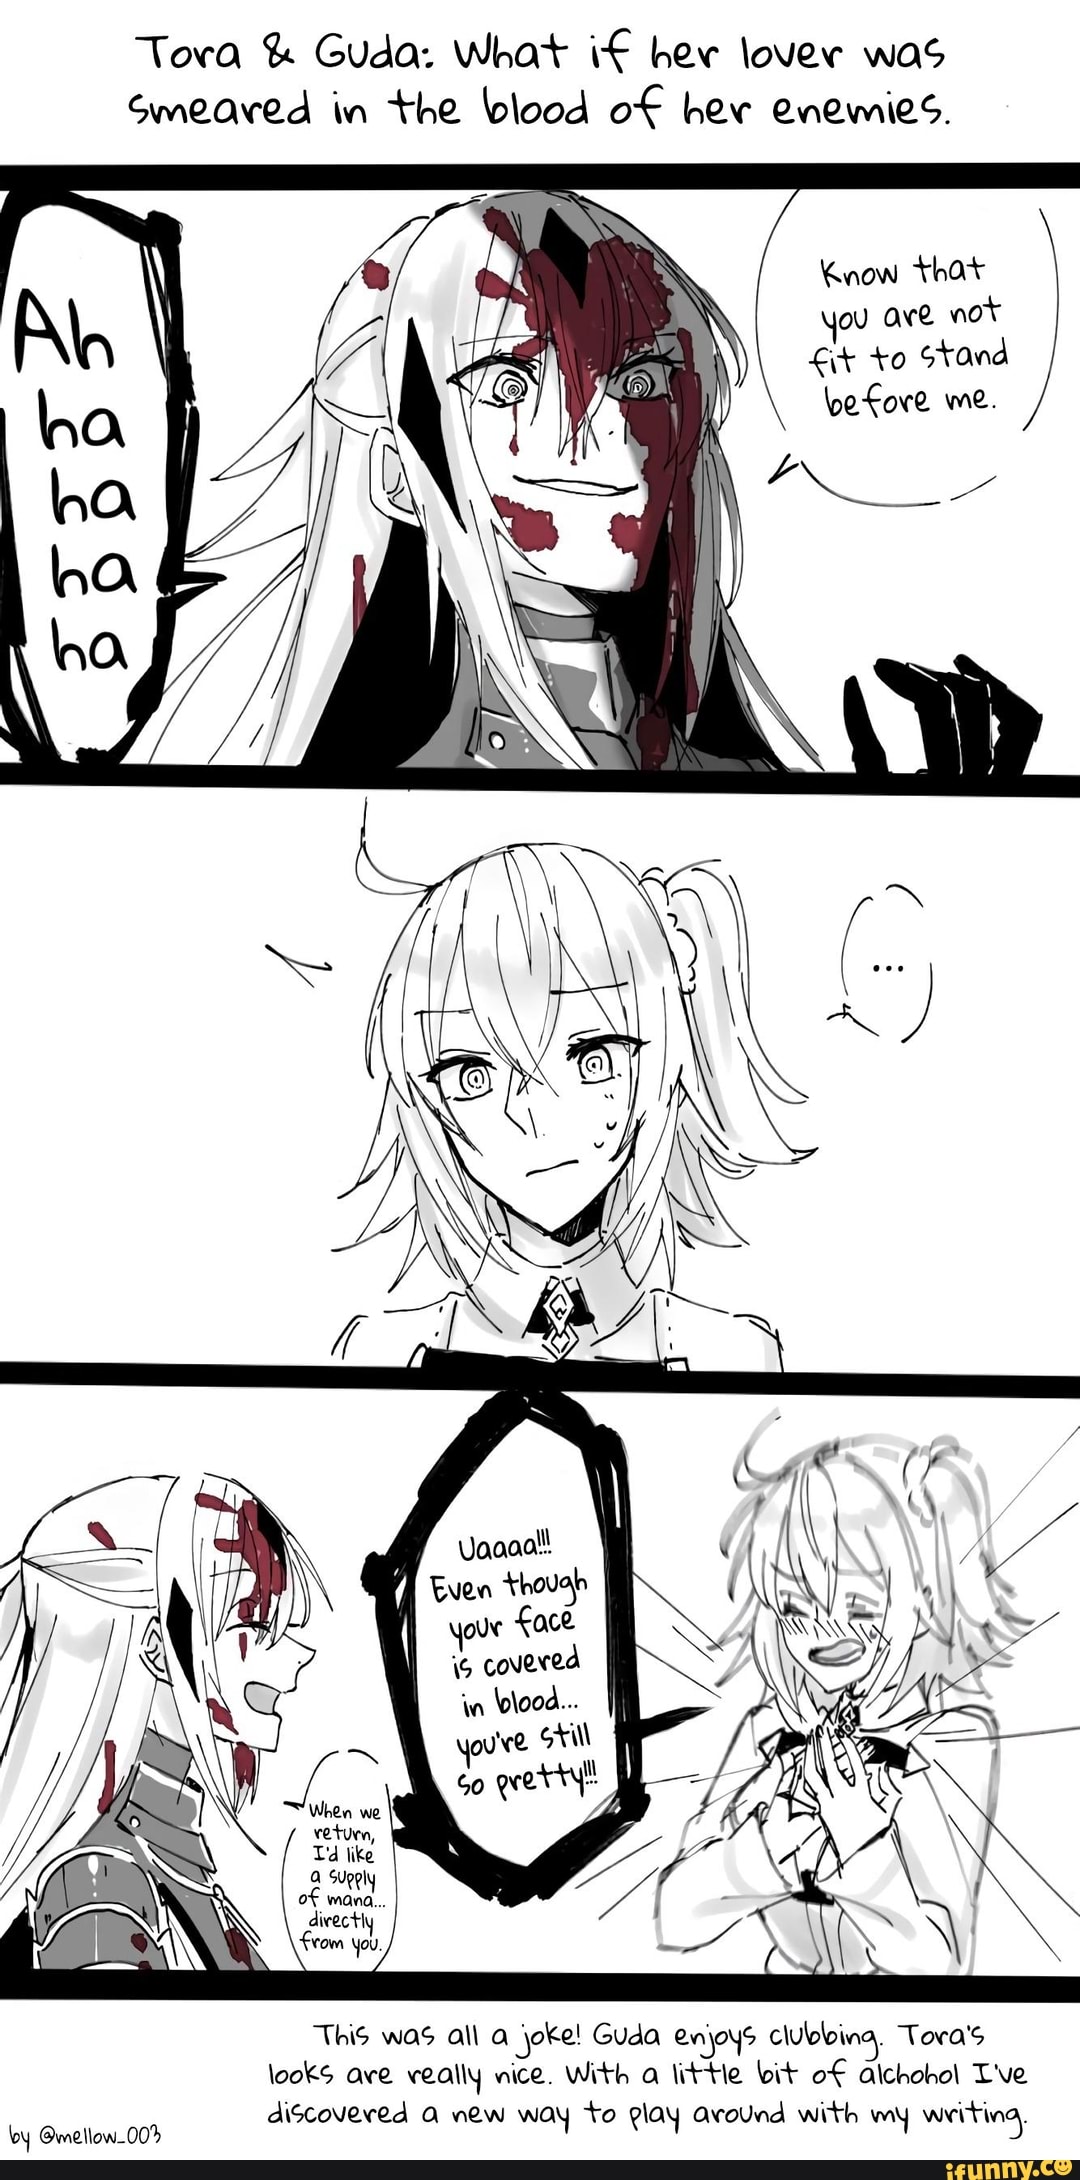 Tora Guda: What i€ her lover was Smeared in the blood of her enemies ...